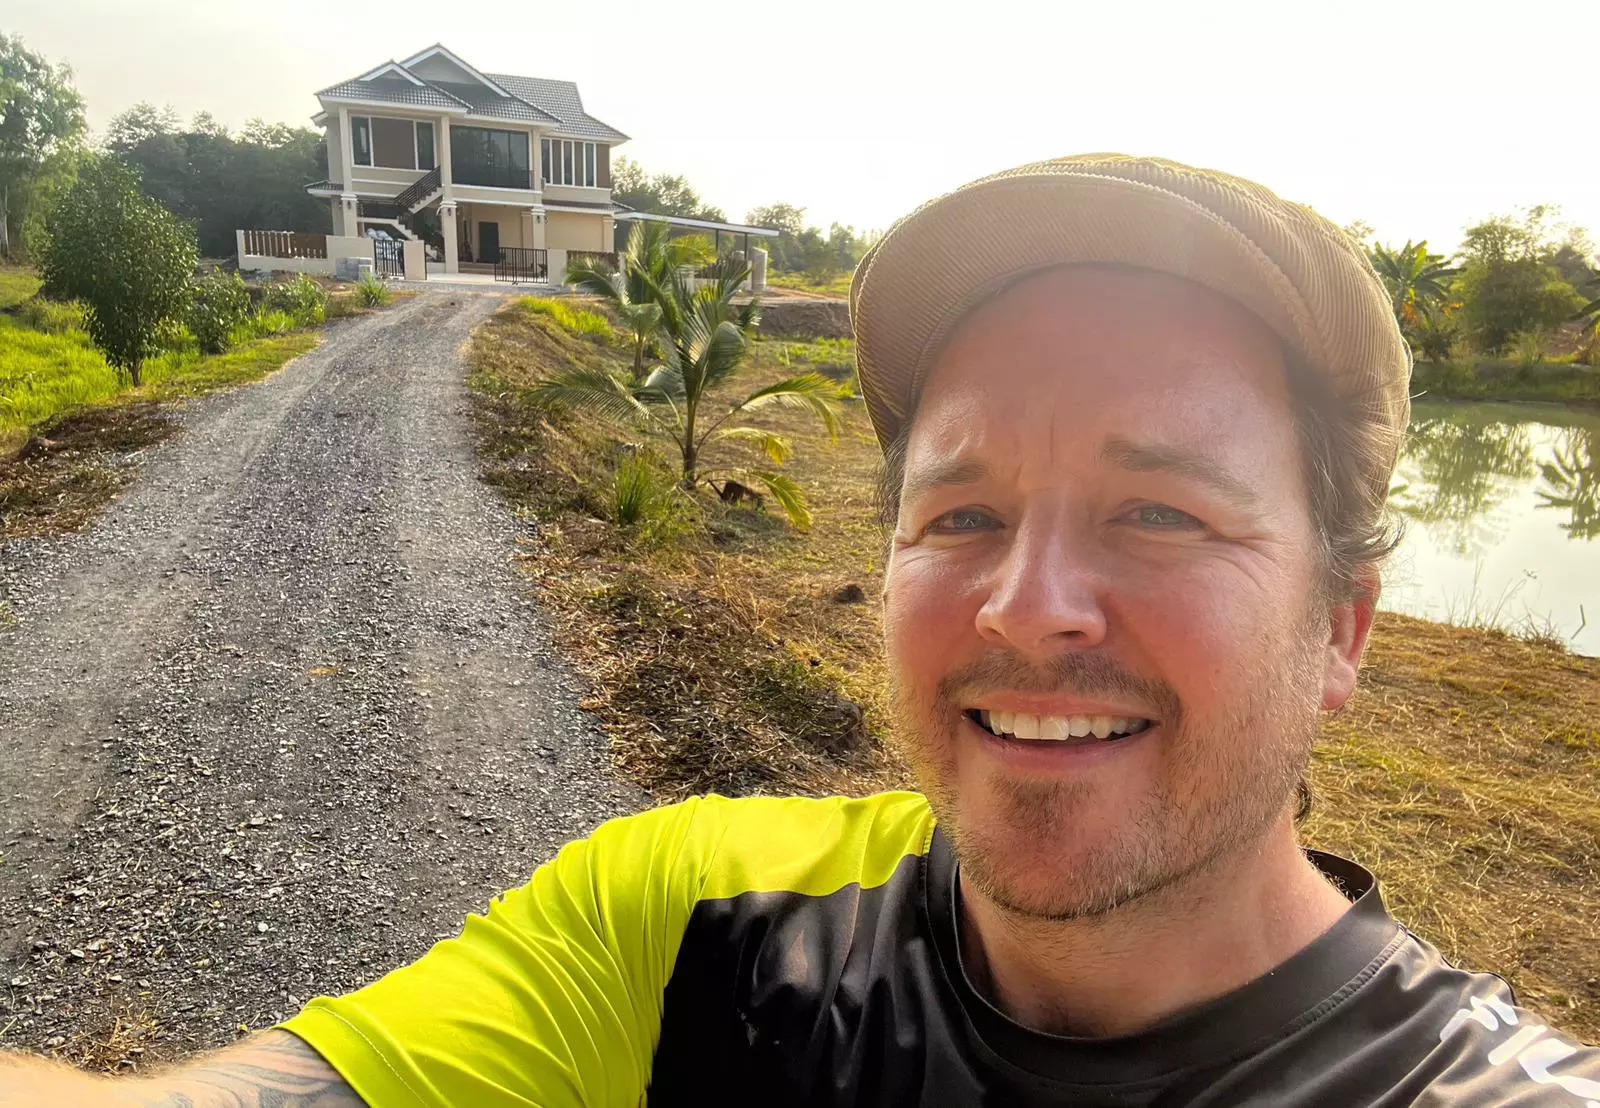 A man posing with his house in the background.